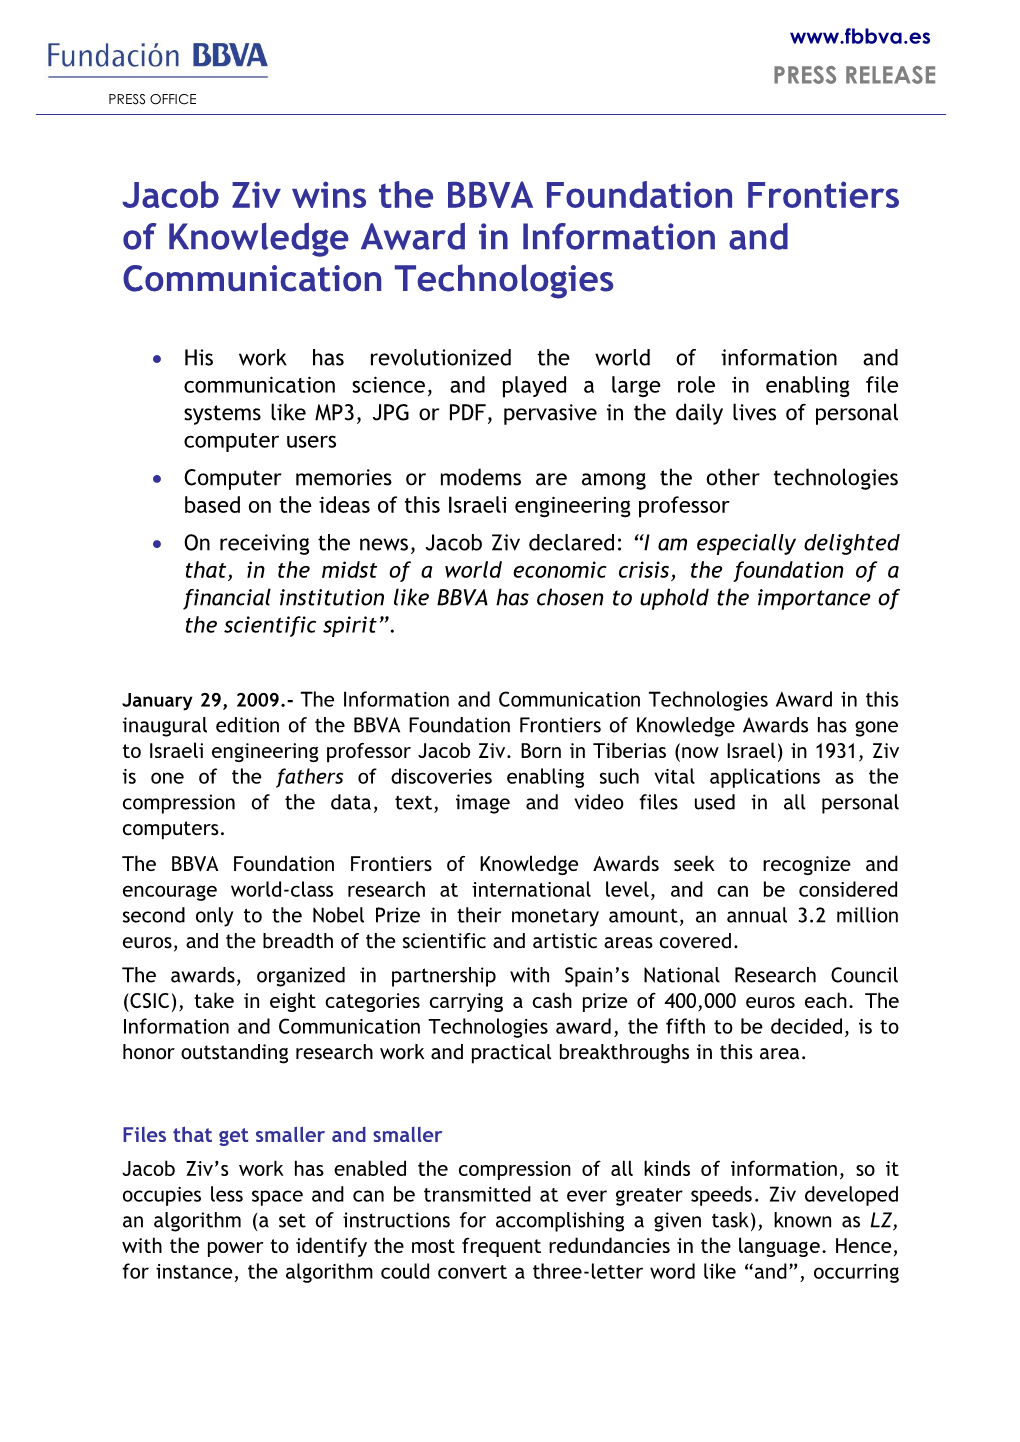 Jacob Ziv Wins the BBVA Foundation Frontiers of Knowledge Award in Information and Communication Technologies